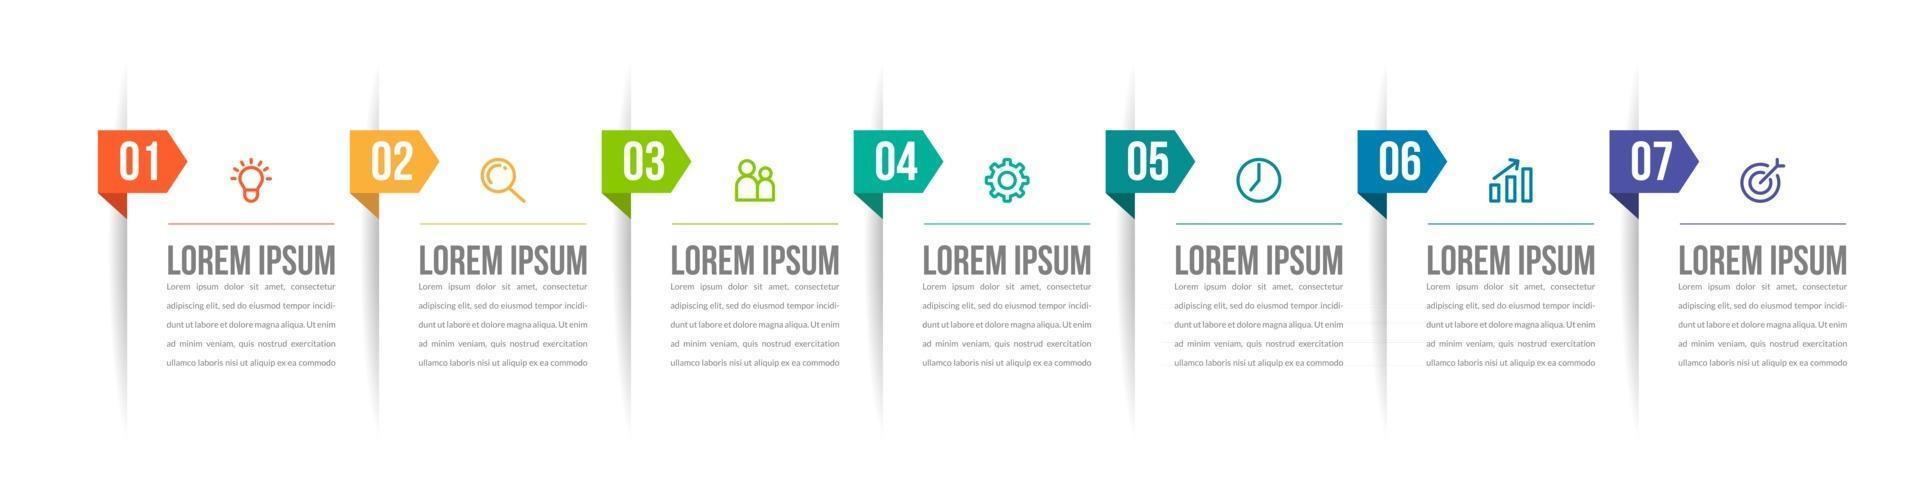 Minimal Infographic with 7 Steps vector